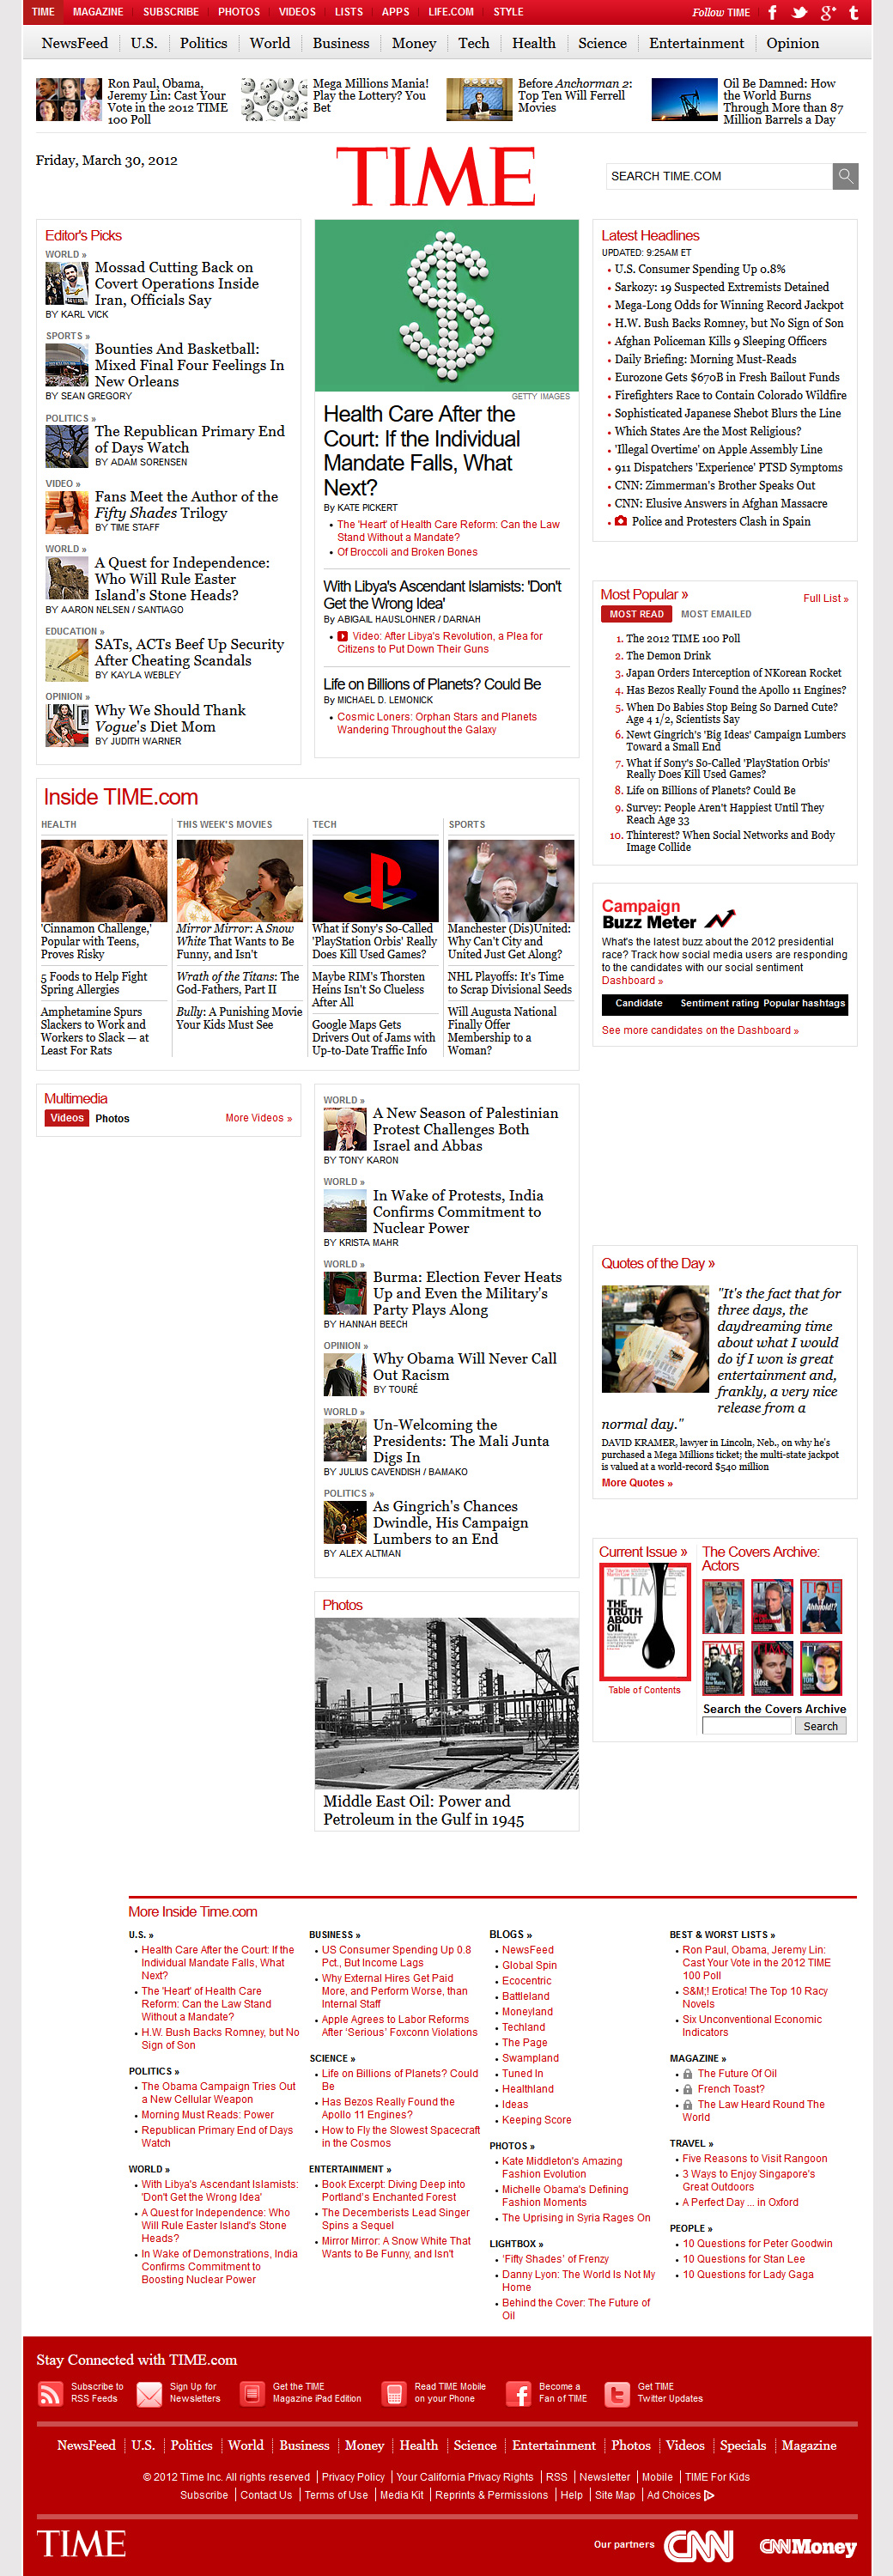 Time website in 2012